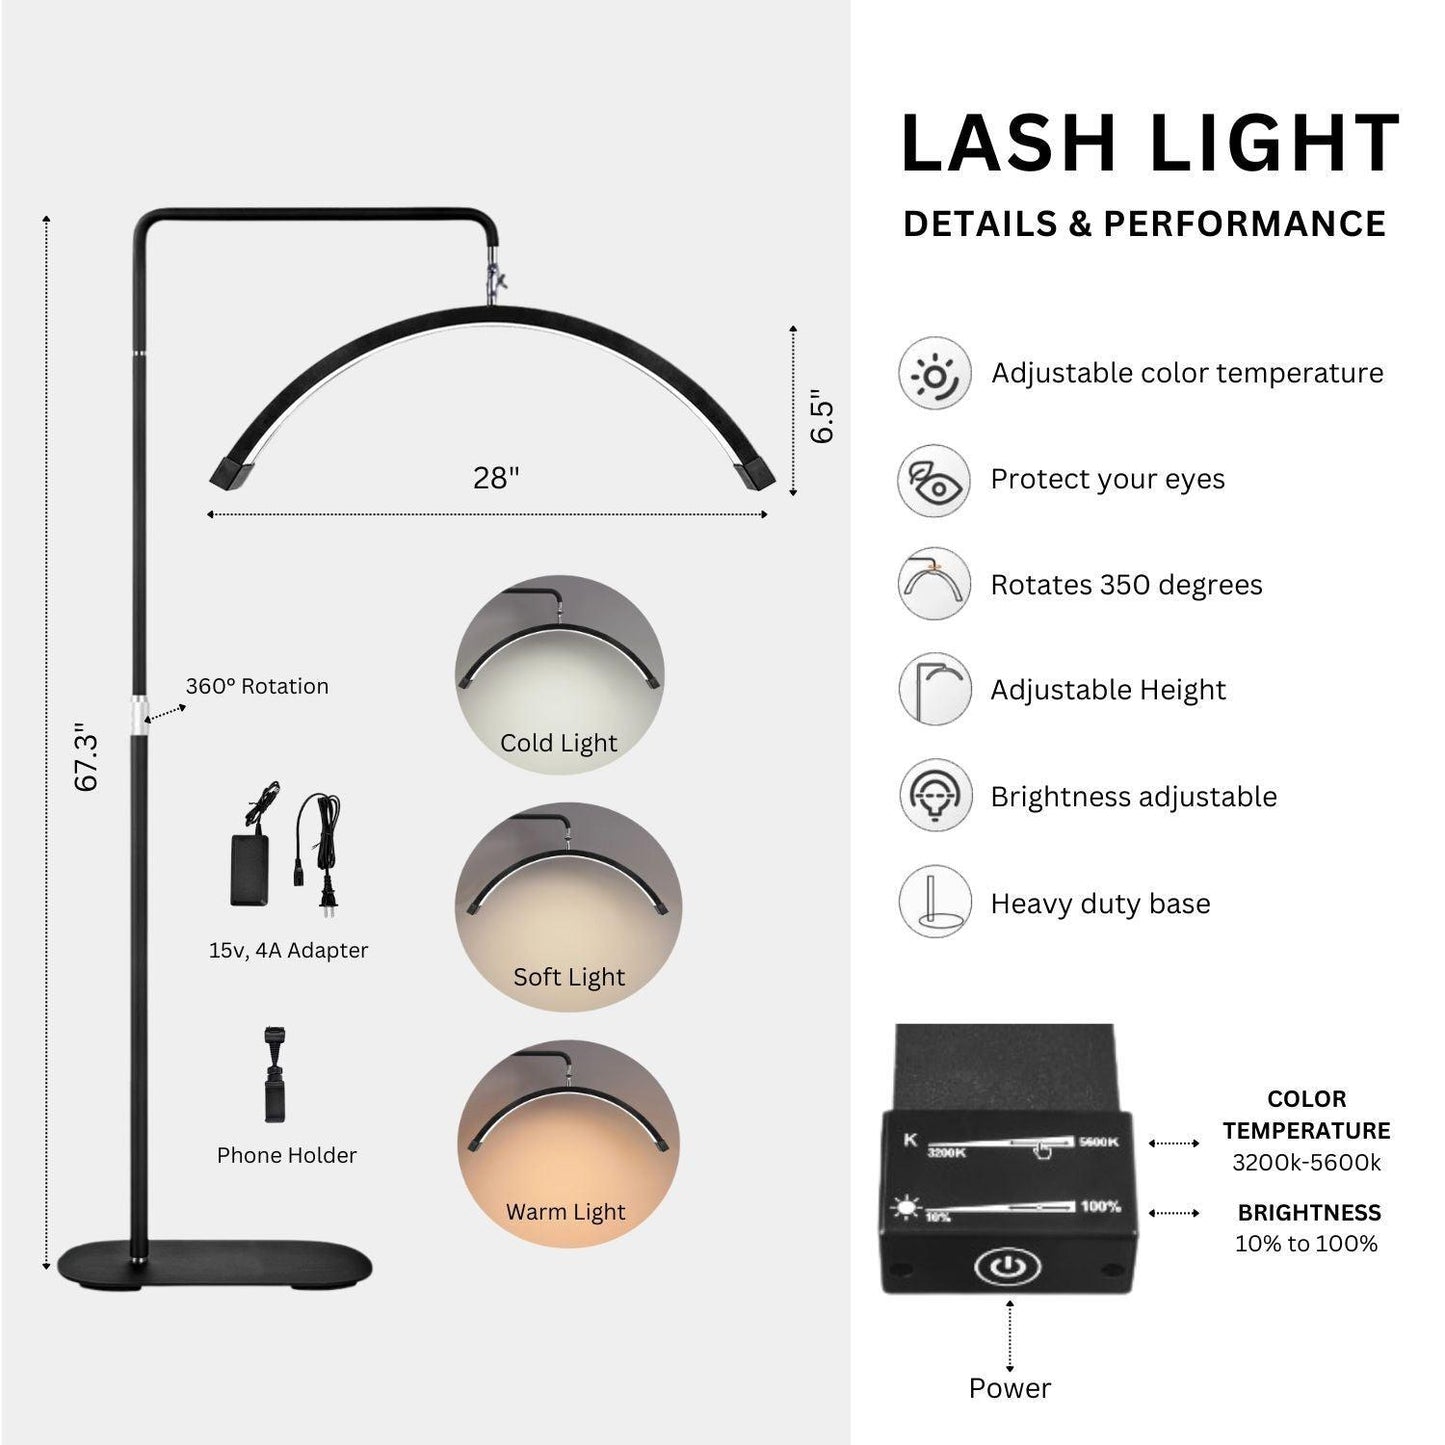 Lash light details and performance